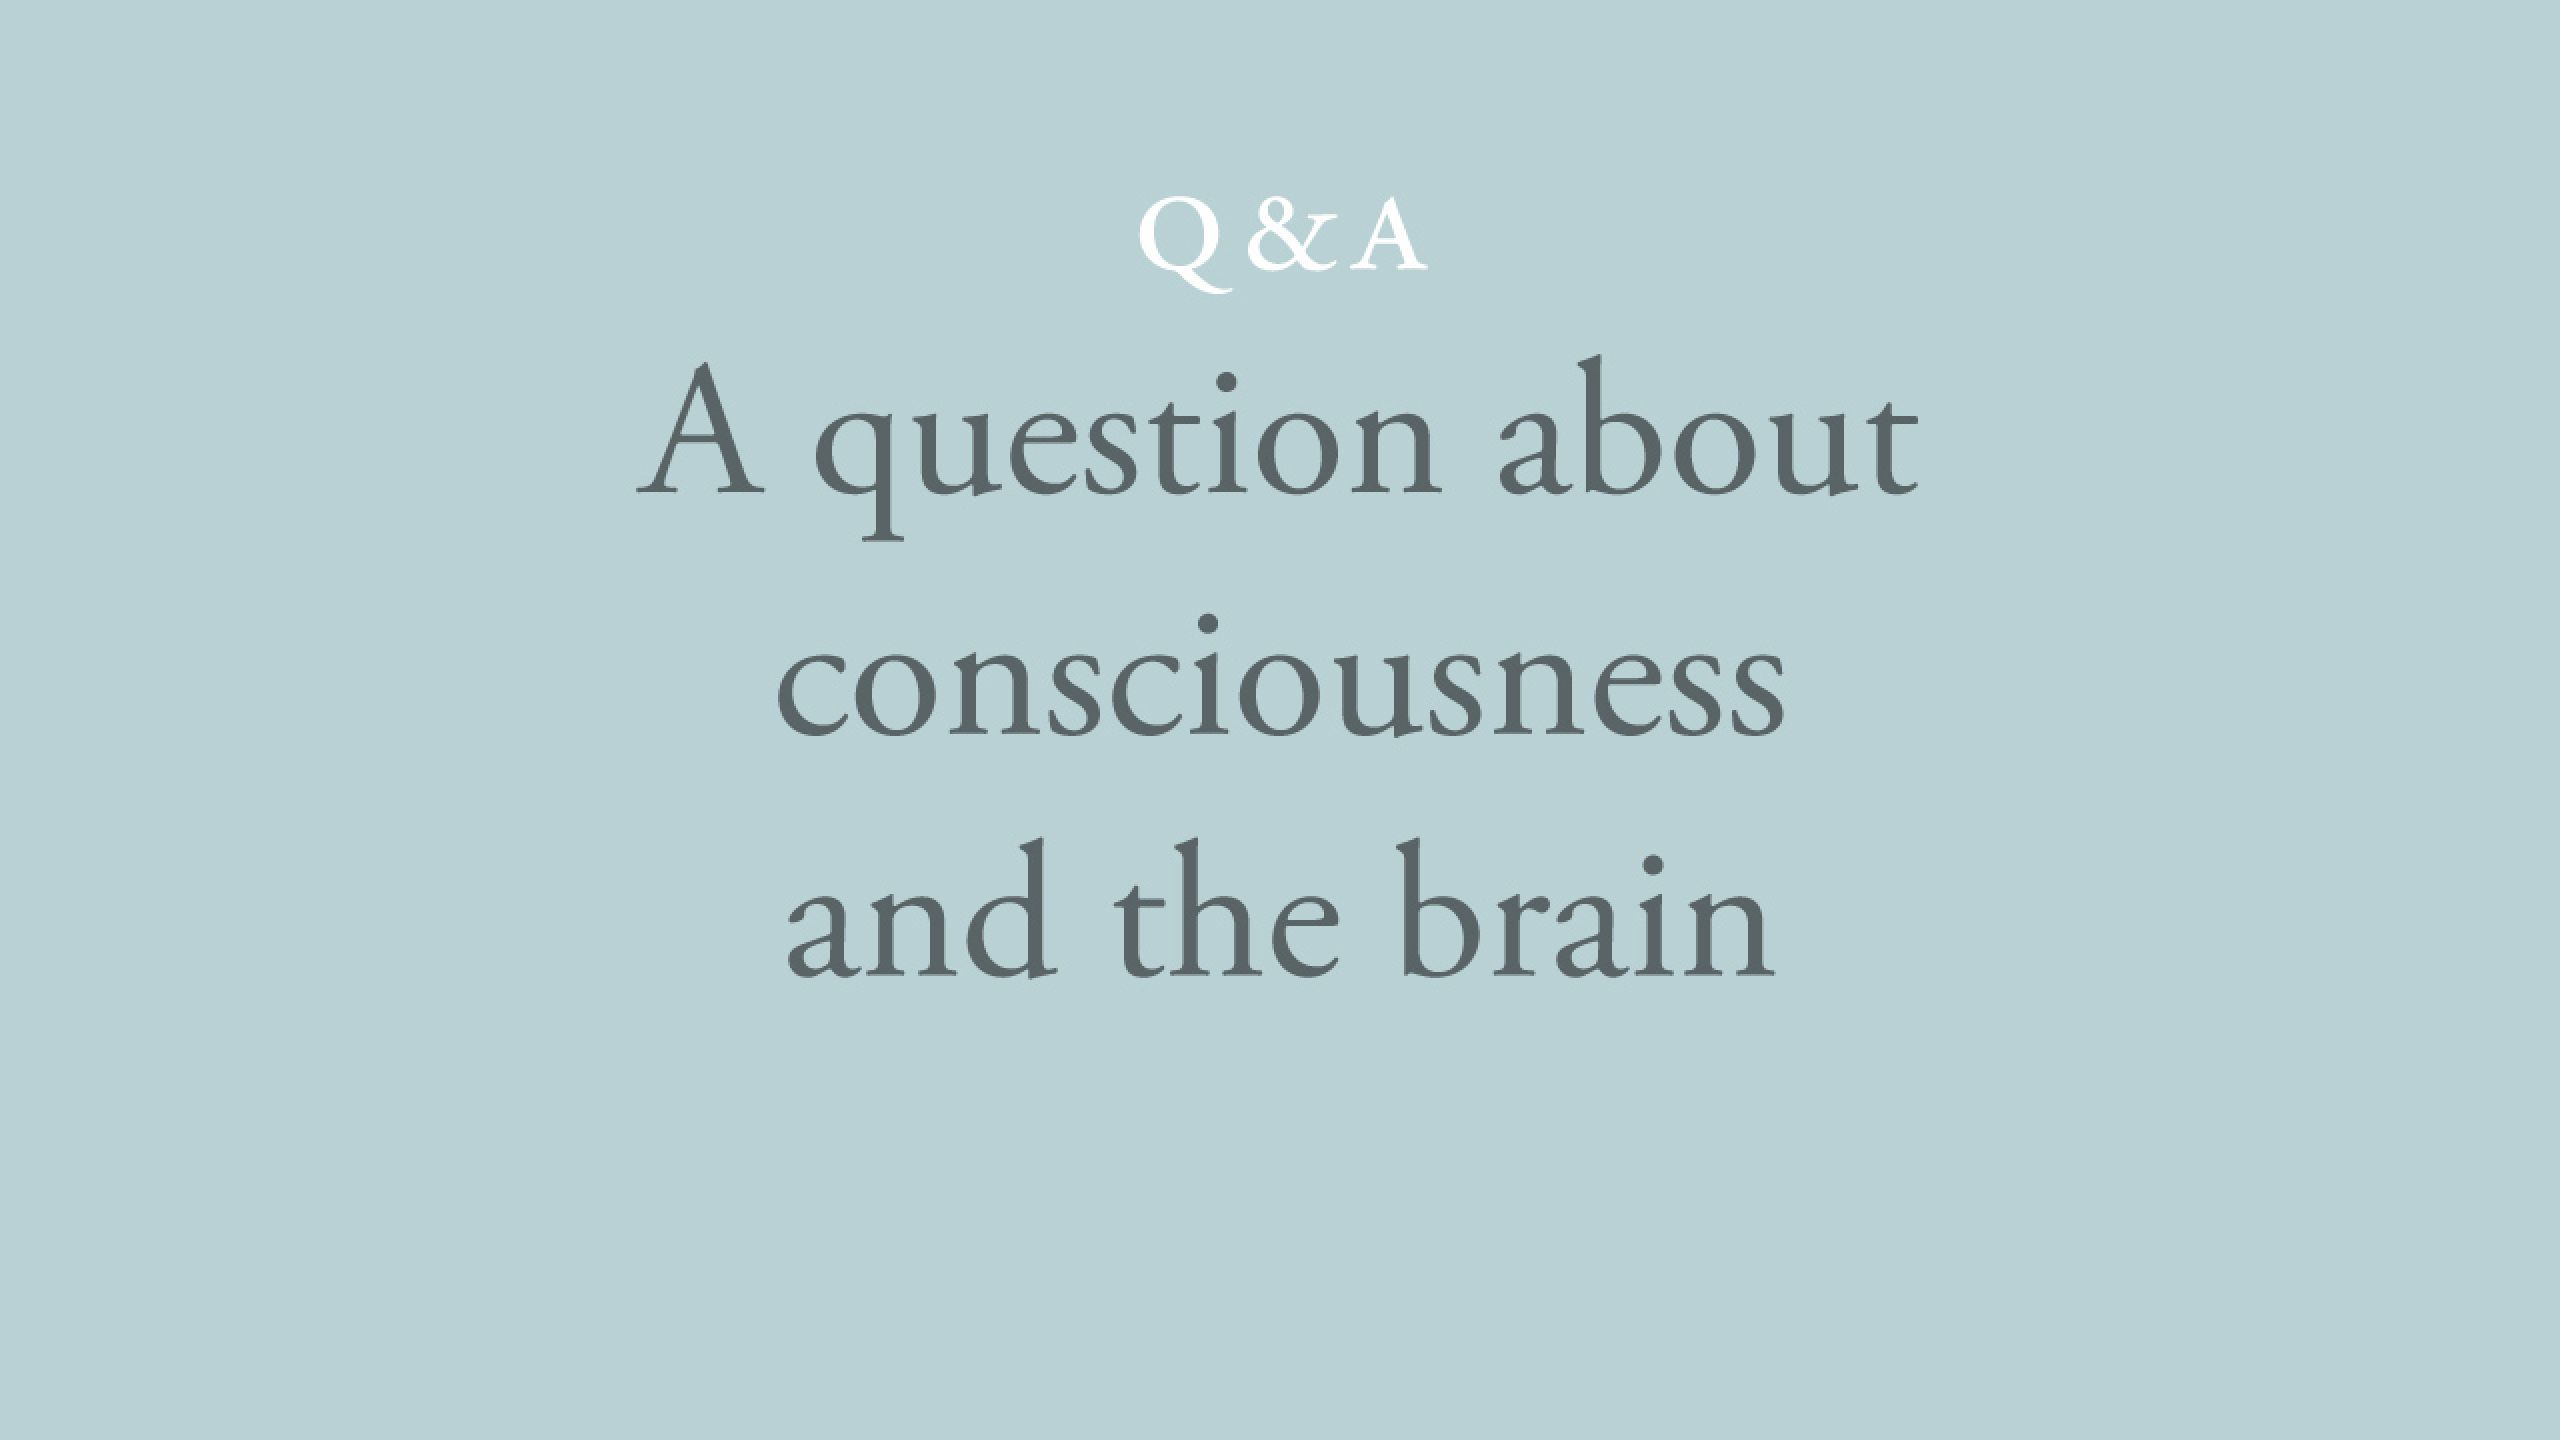 Is consciousness a product of the brain?